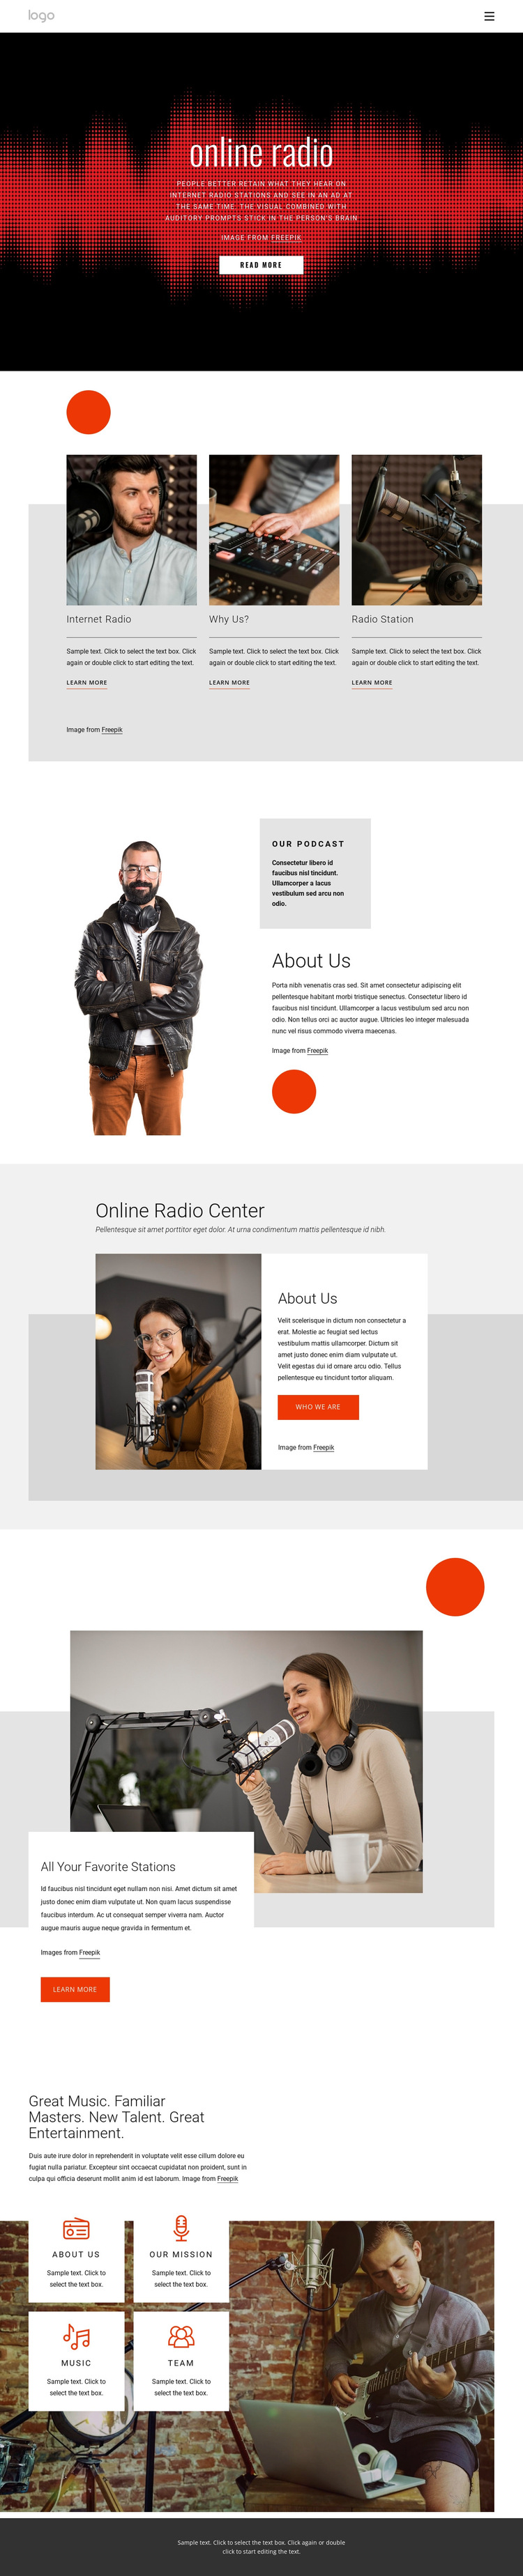 Online radio shows HTML5 Template